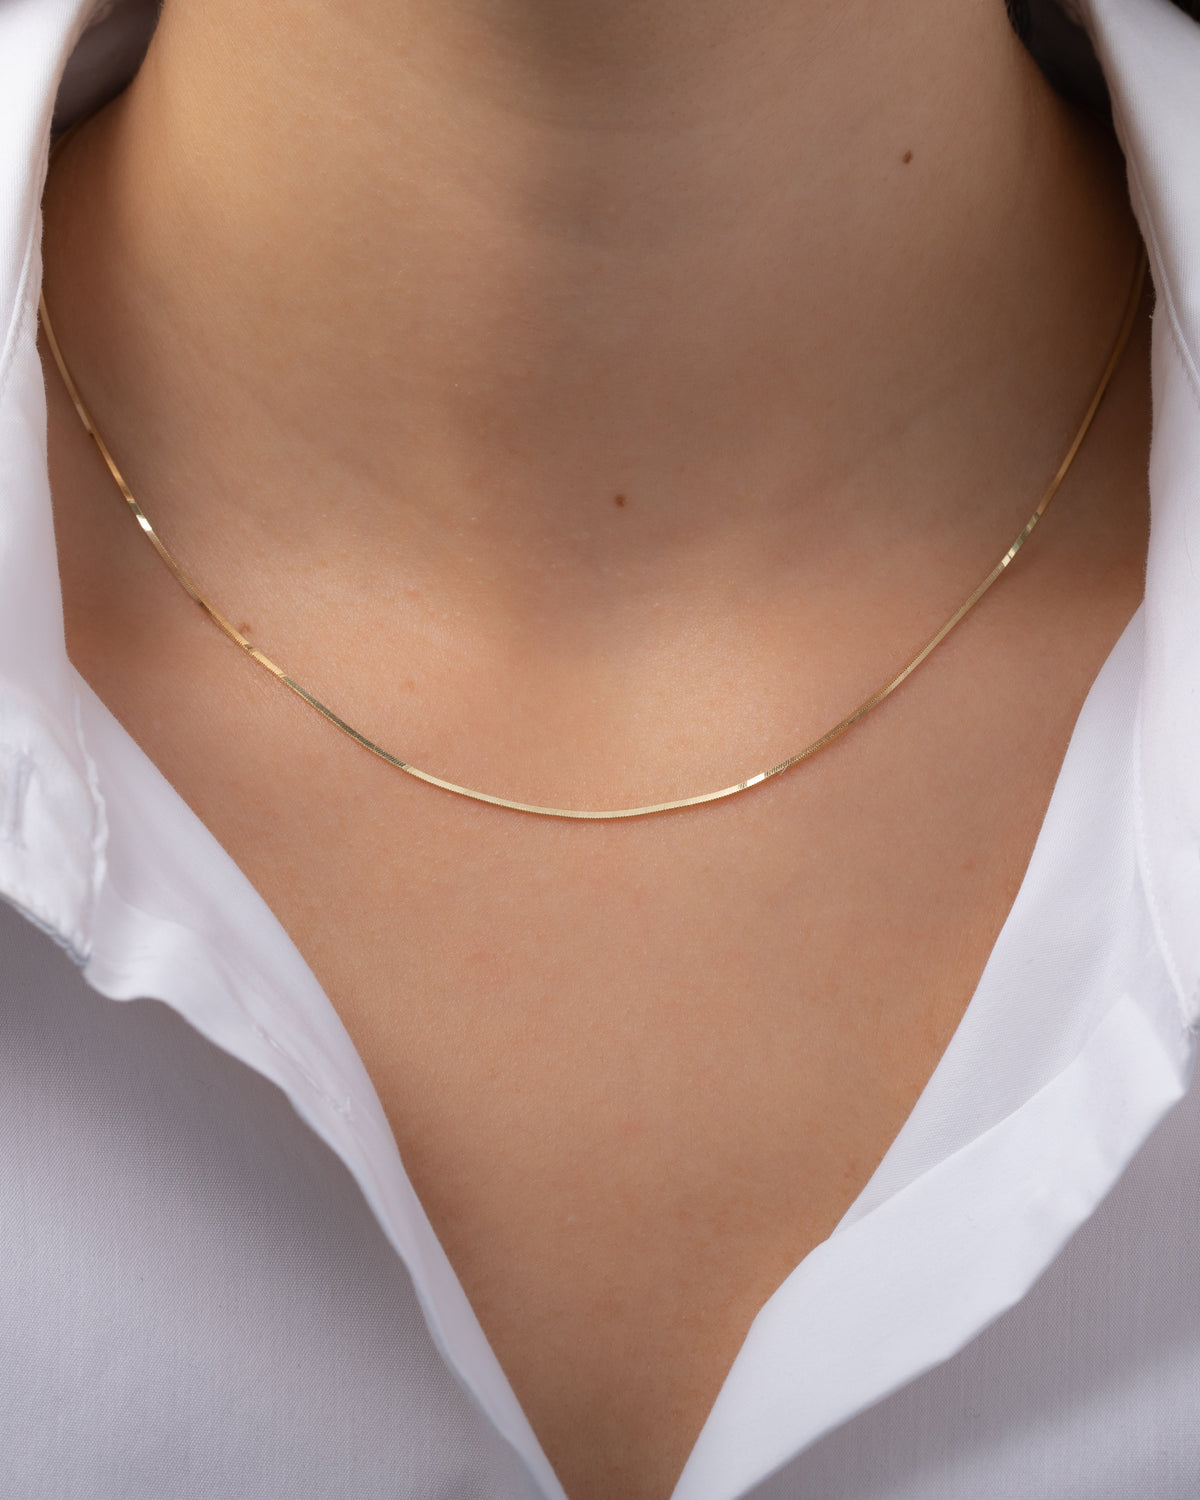 14k Gold Snake Chain Necklace